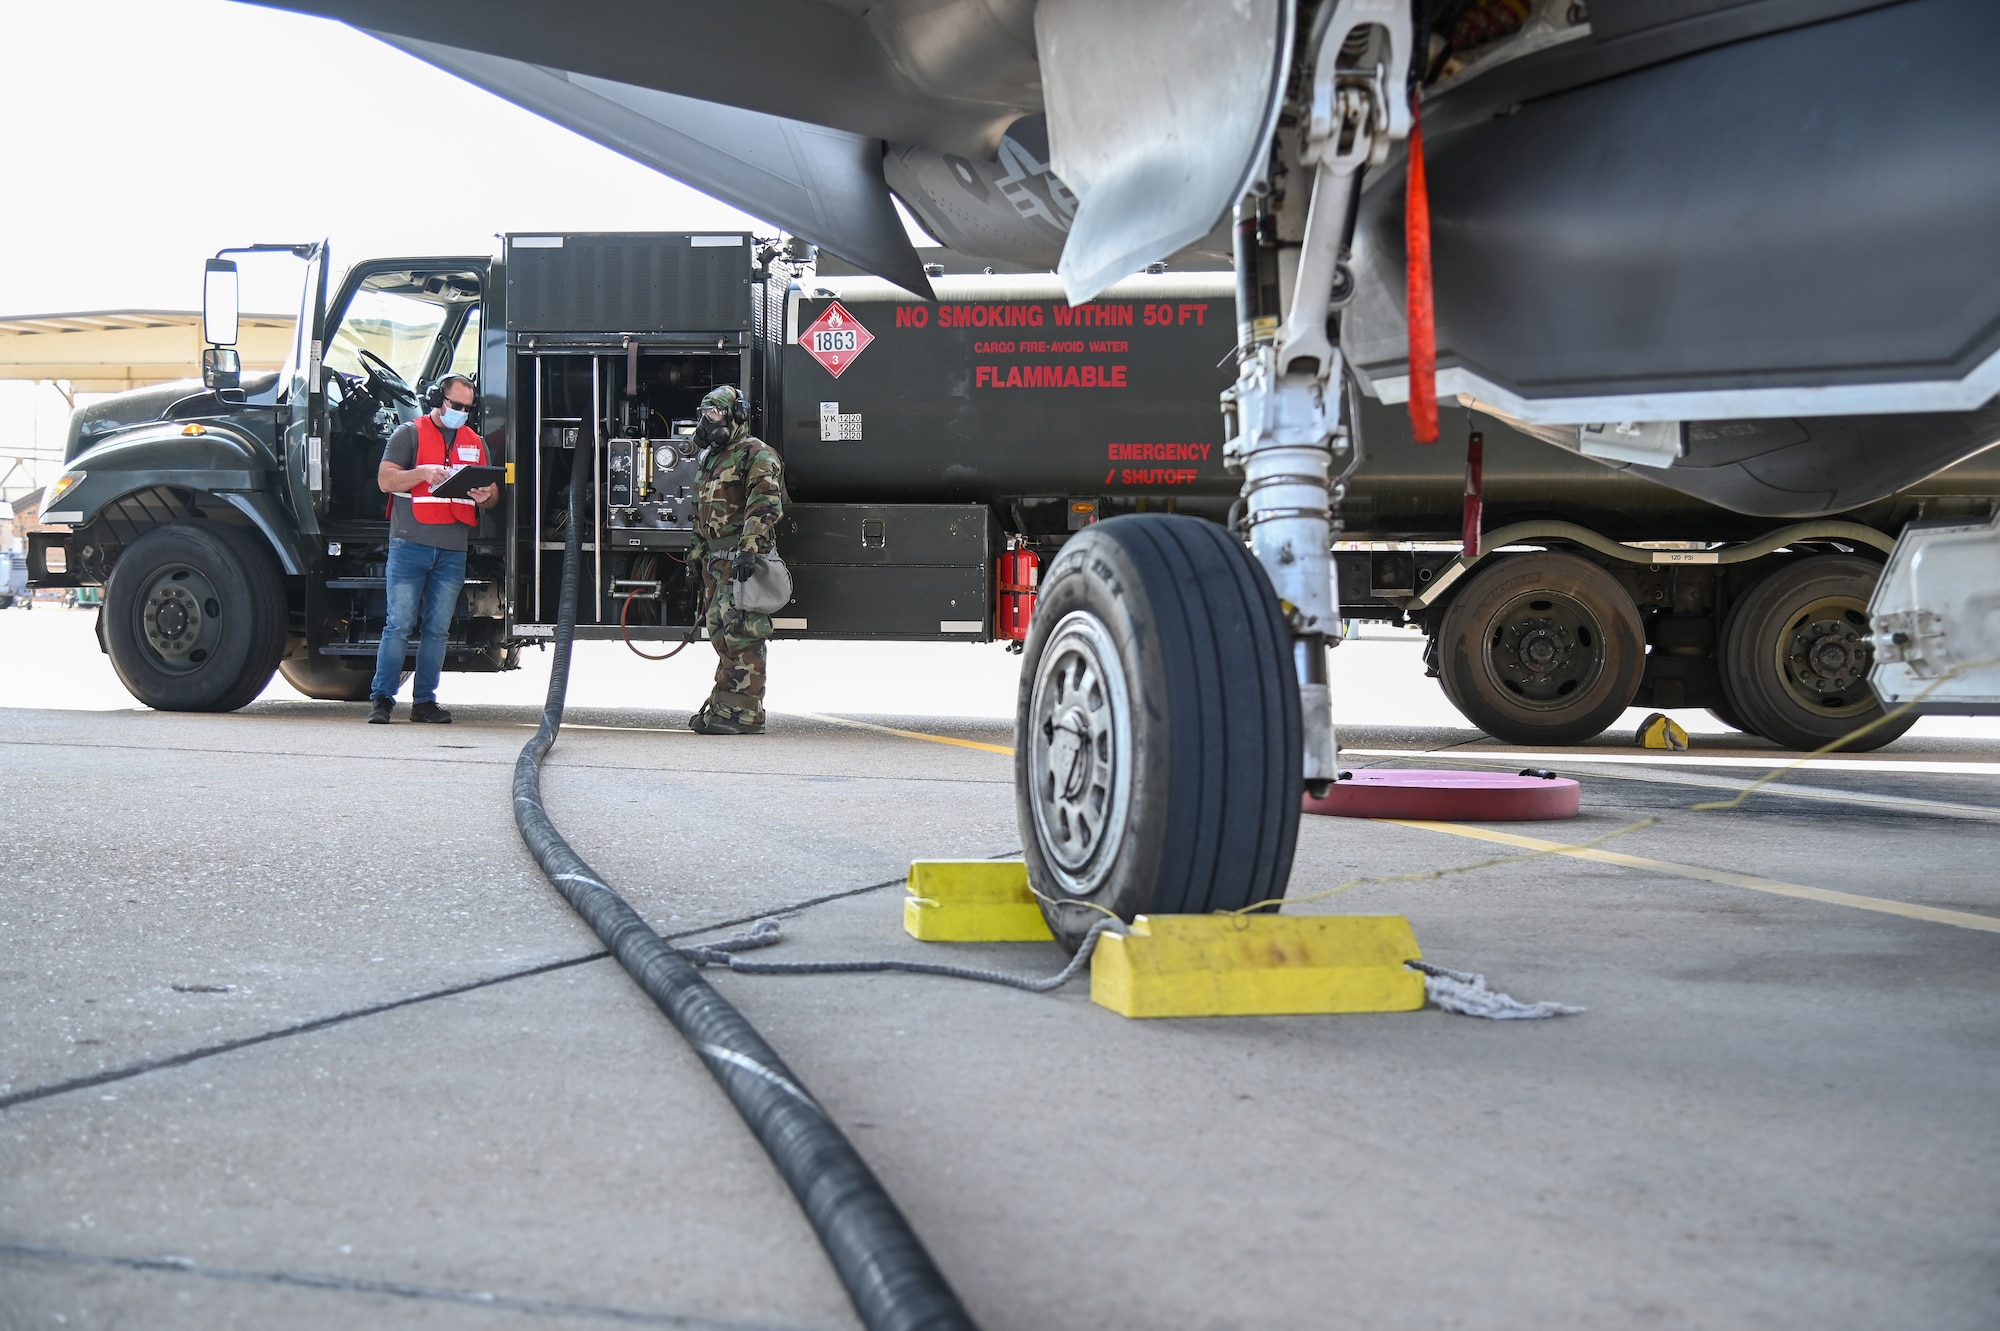 Staff Sgt. Joseph Gourley, 75th Logistics Readiness Squadron, fuels an F-35A Lightning II while being inspected by Wesley Jones, 75th LRS Wing Inspection Team, Sept. 22, 2021, at Hill Air Force Base, Utah. Squadrons from the 75th Air Base Wing participated in a phase II readiness exercise where they were assessed on performing tasks in an austere environment. (U.S. Air Force photo by Cynthia Griggs)